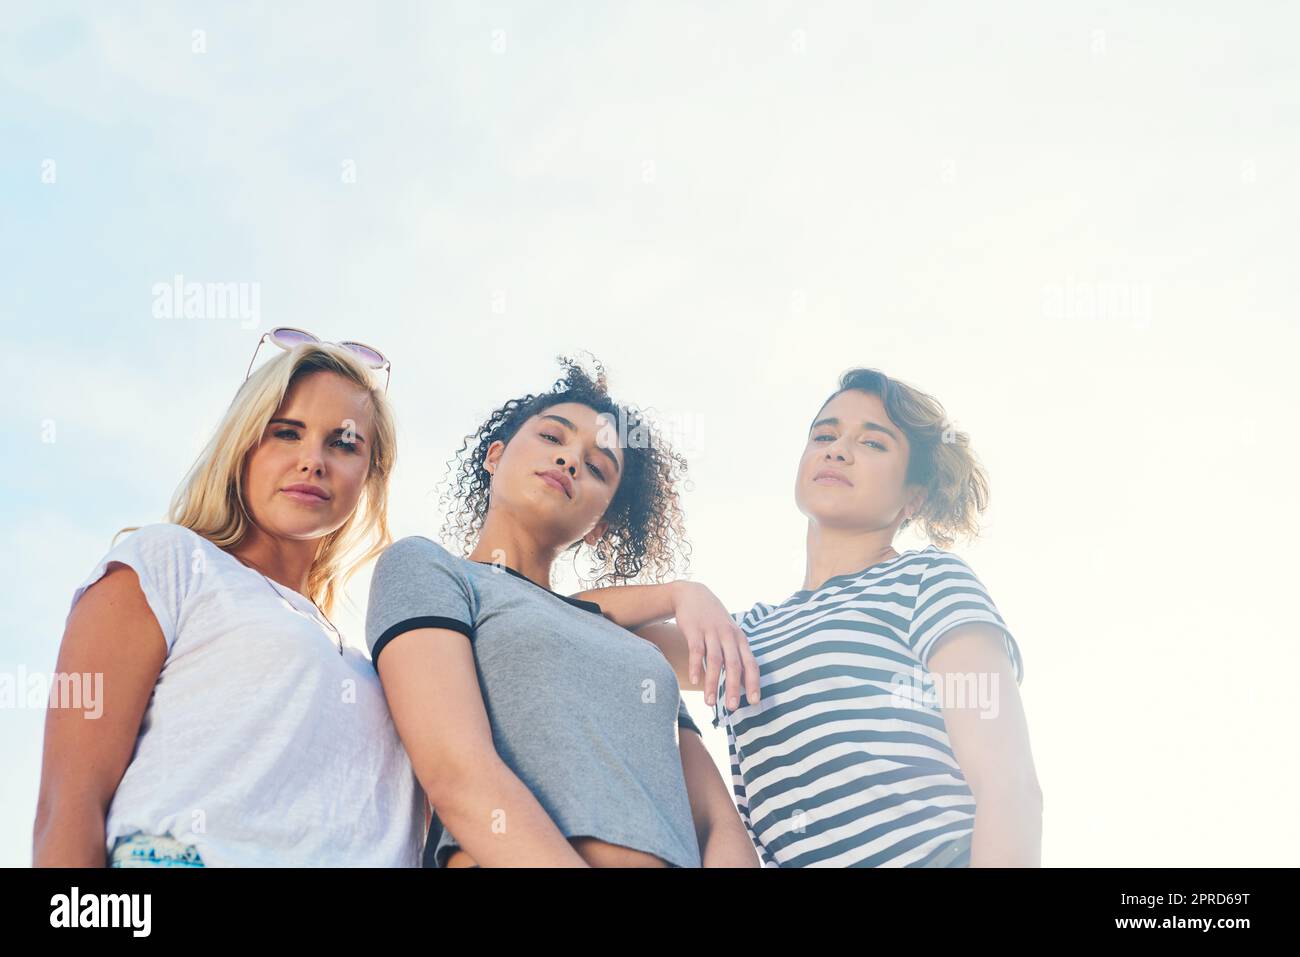 We bring the heat. three friends spending the day together on a sunny day. Stock Photo